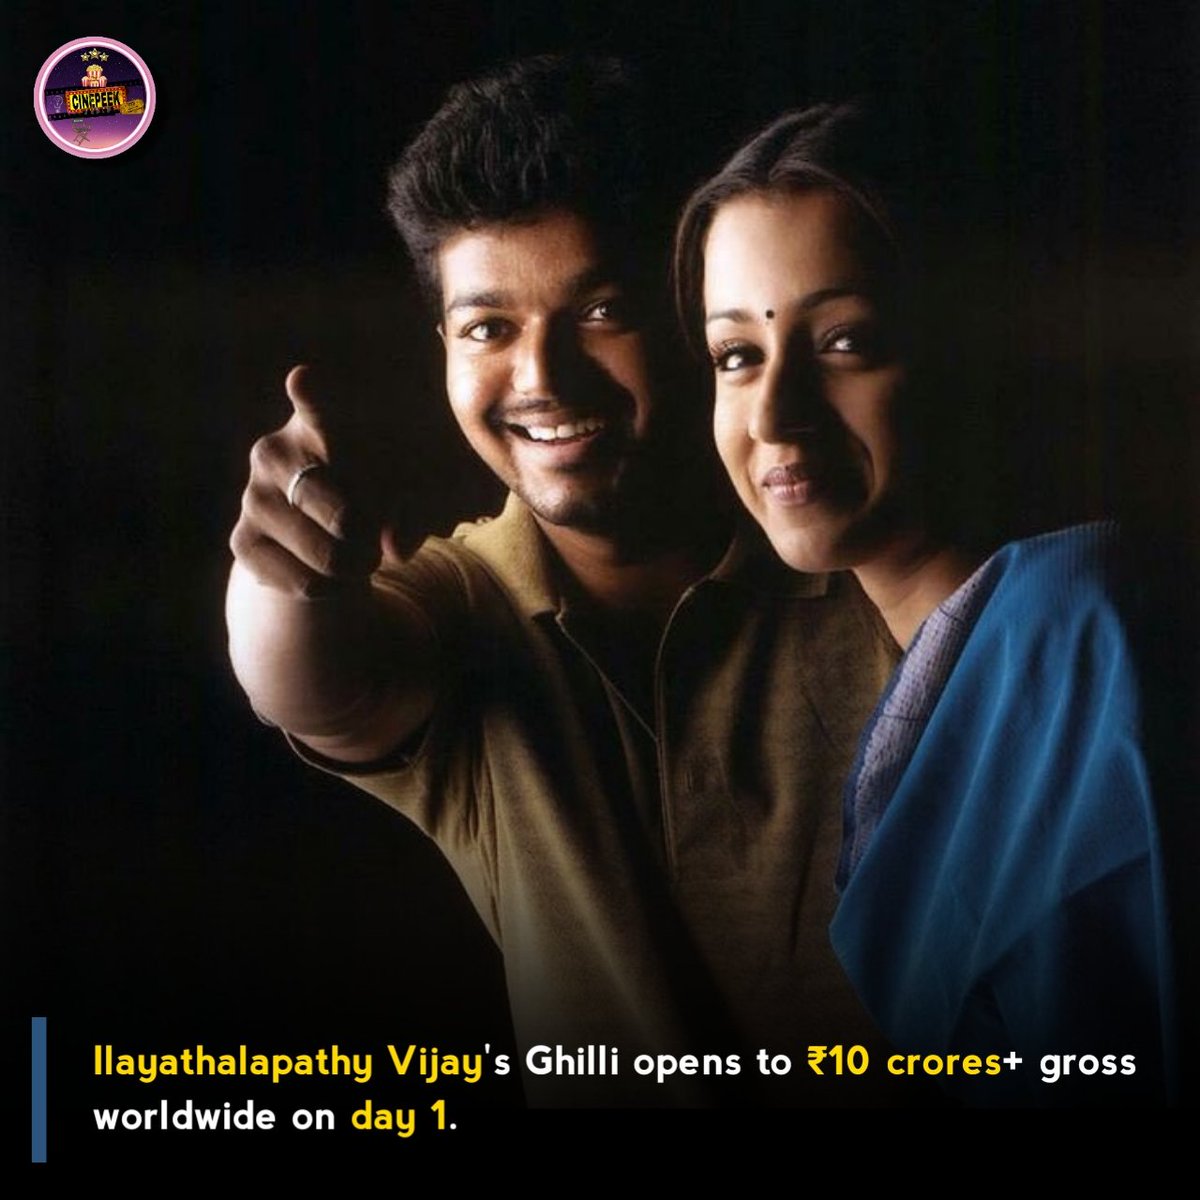 #FilmyBuzz - Ilayathalapathy Vijay's #Ghilli opens to ₹10 crores+ gross worldwide on day 1. SENSATIONAL for a re-release 🔥🔥 #Vijay #Trisha #CinePeek